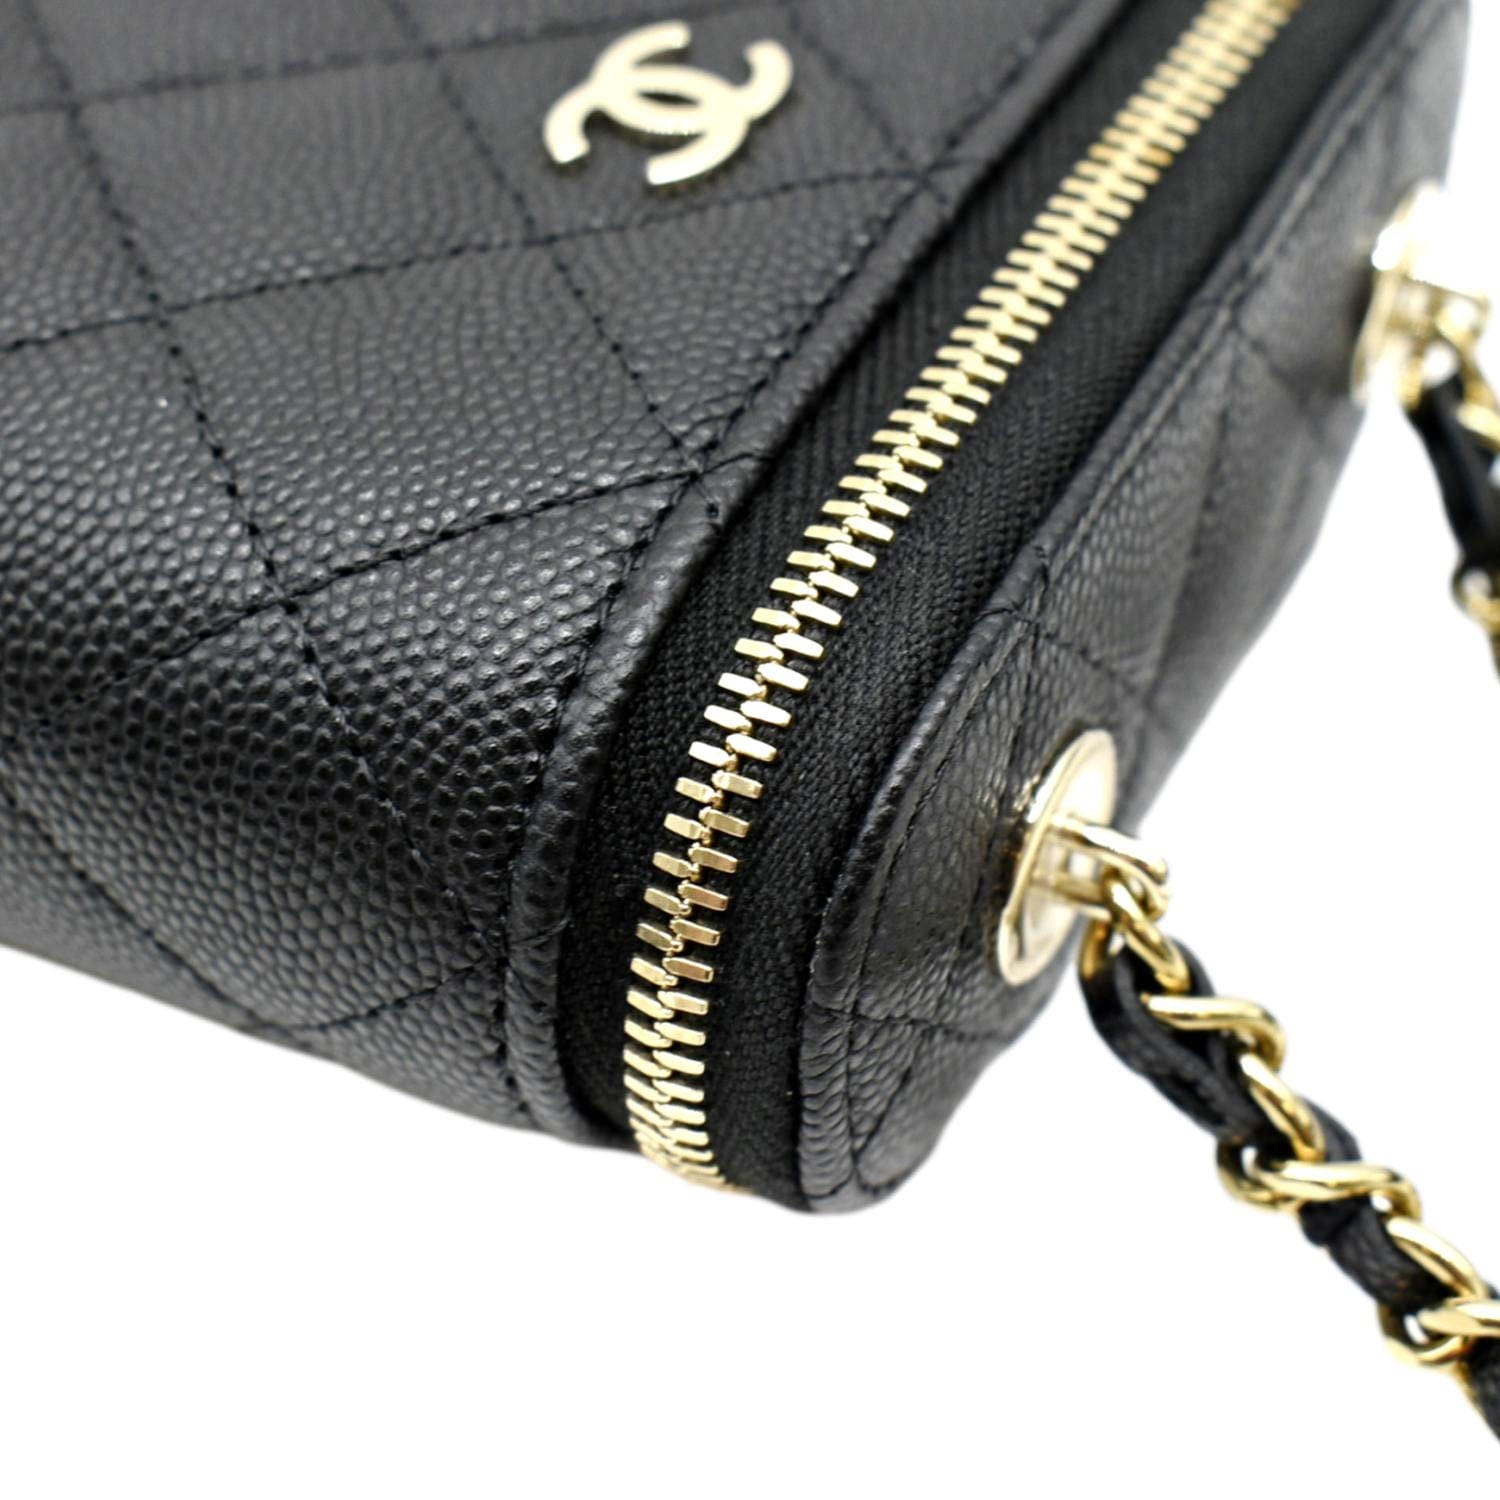 CHANEL Small Vertical Caviar Quilted Leather Chain Vanity Case Crossbo